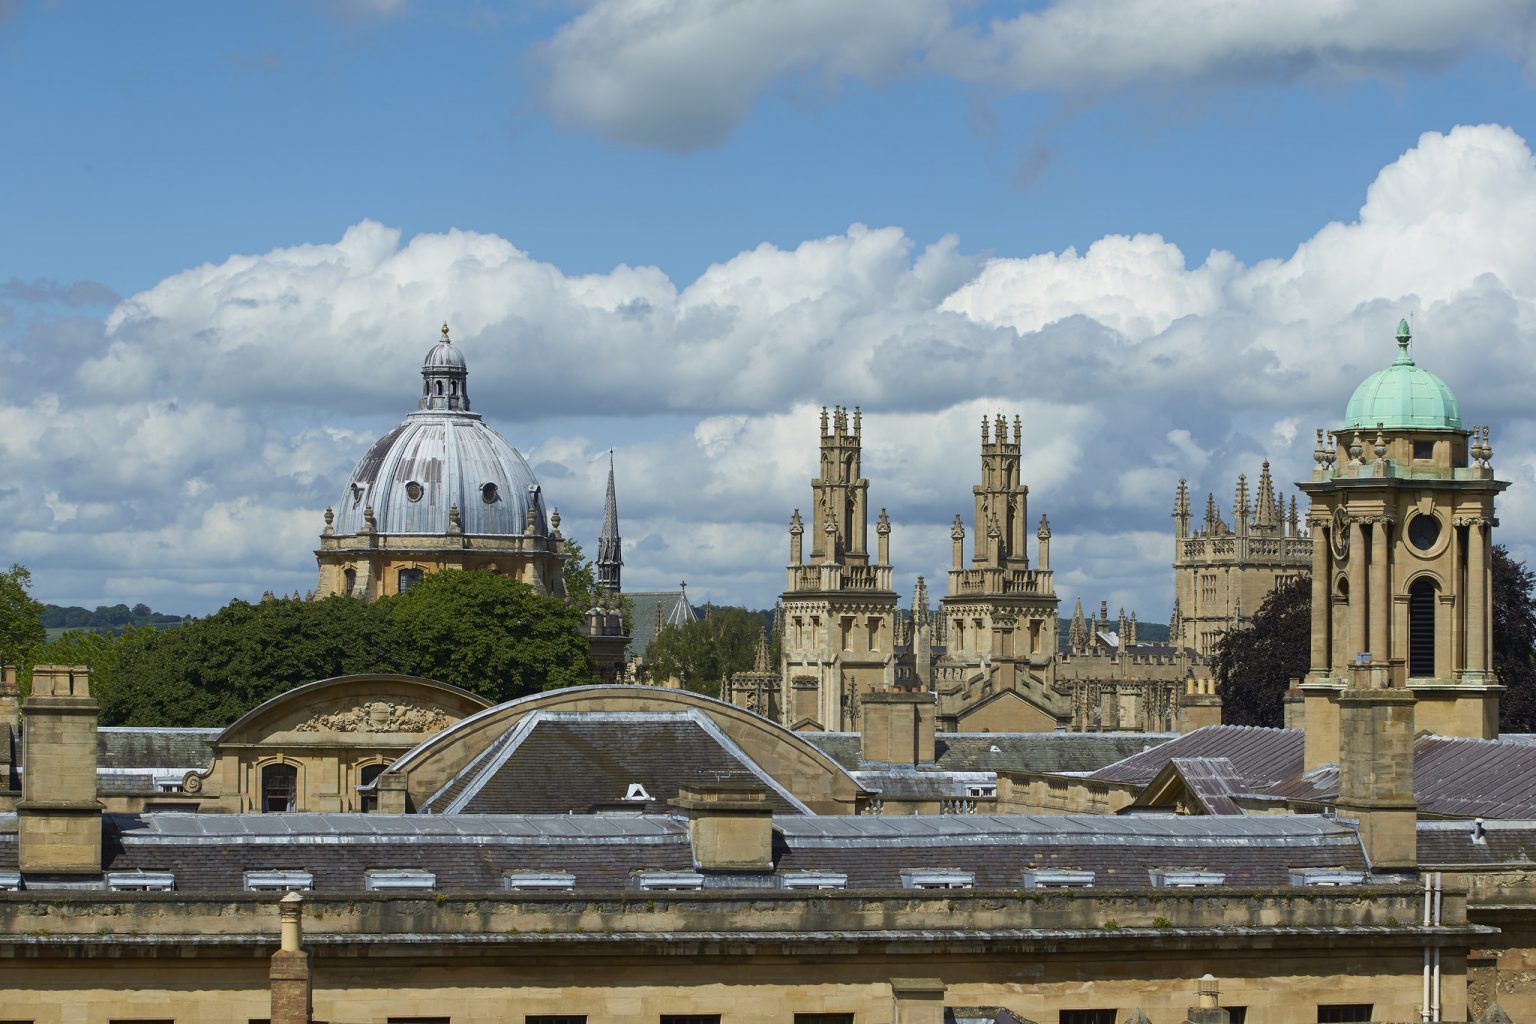 Oxford city skyline taken from the Kelly building roof